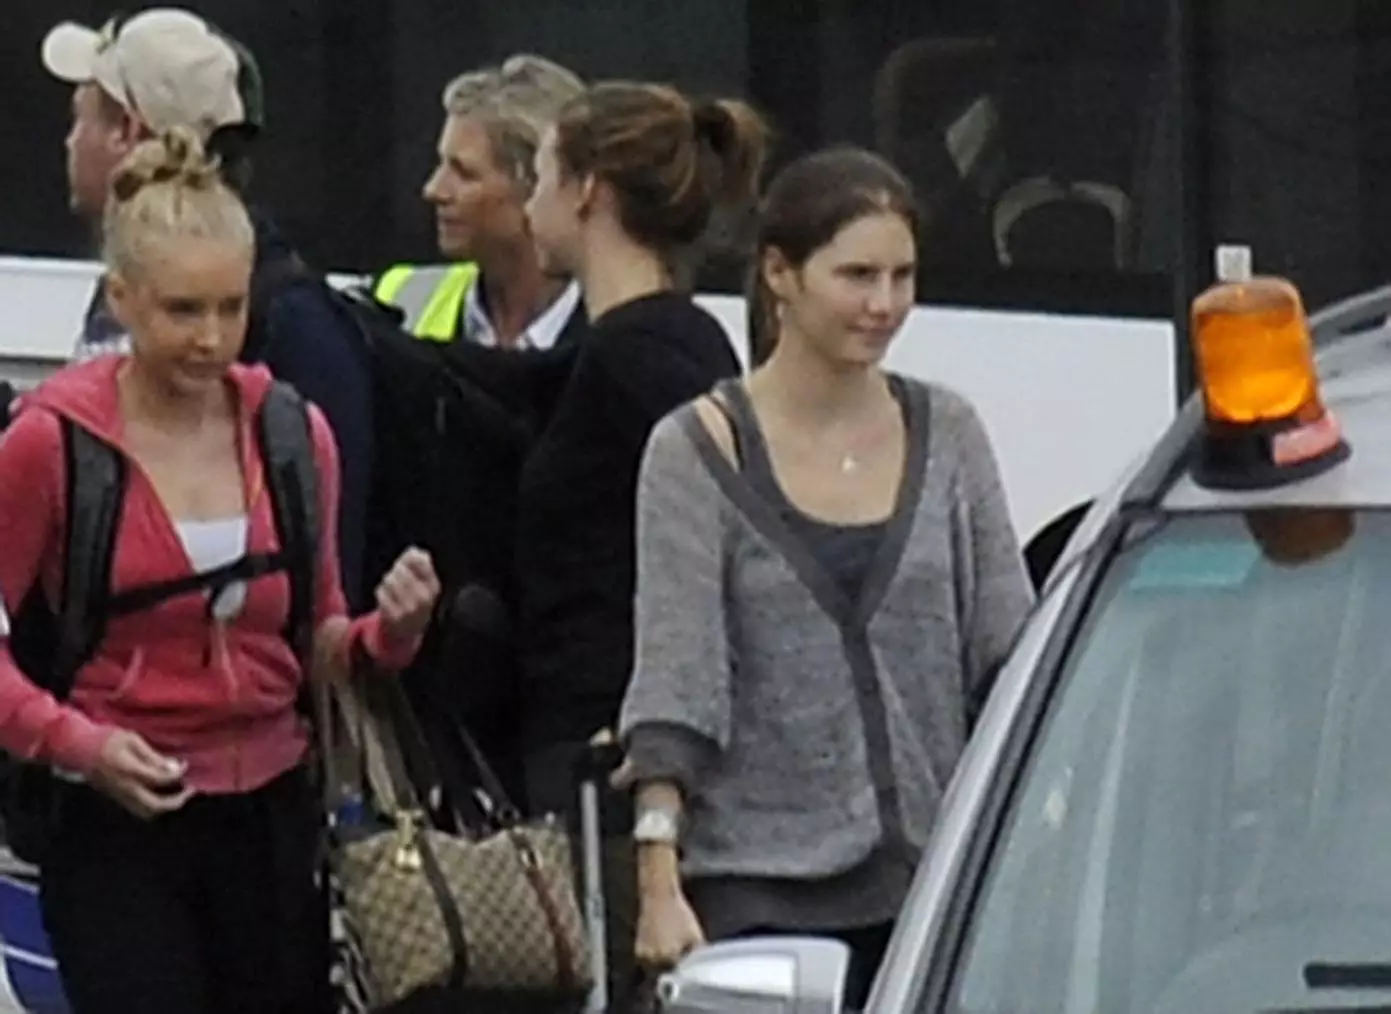 Amanda Knox (right) at Heathrow Airport after she was acquitted of the murder of British student Meredith Kercher.